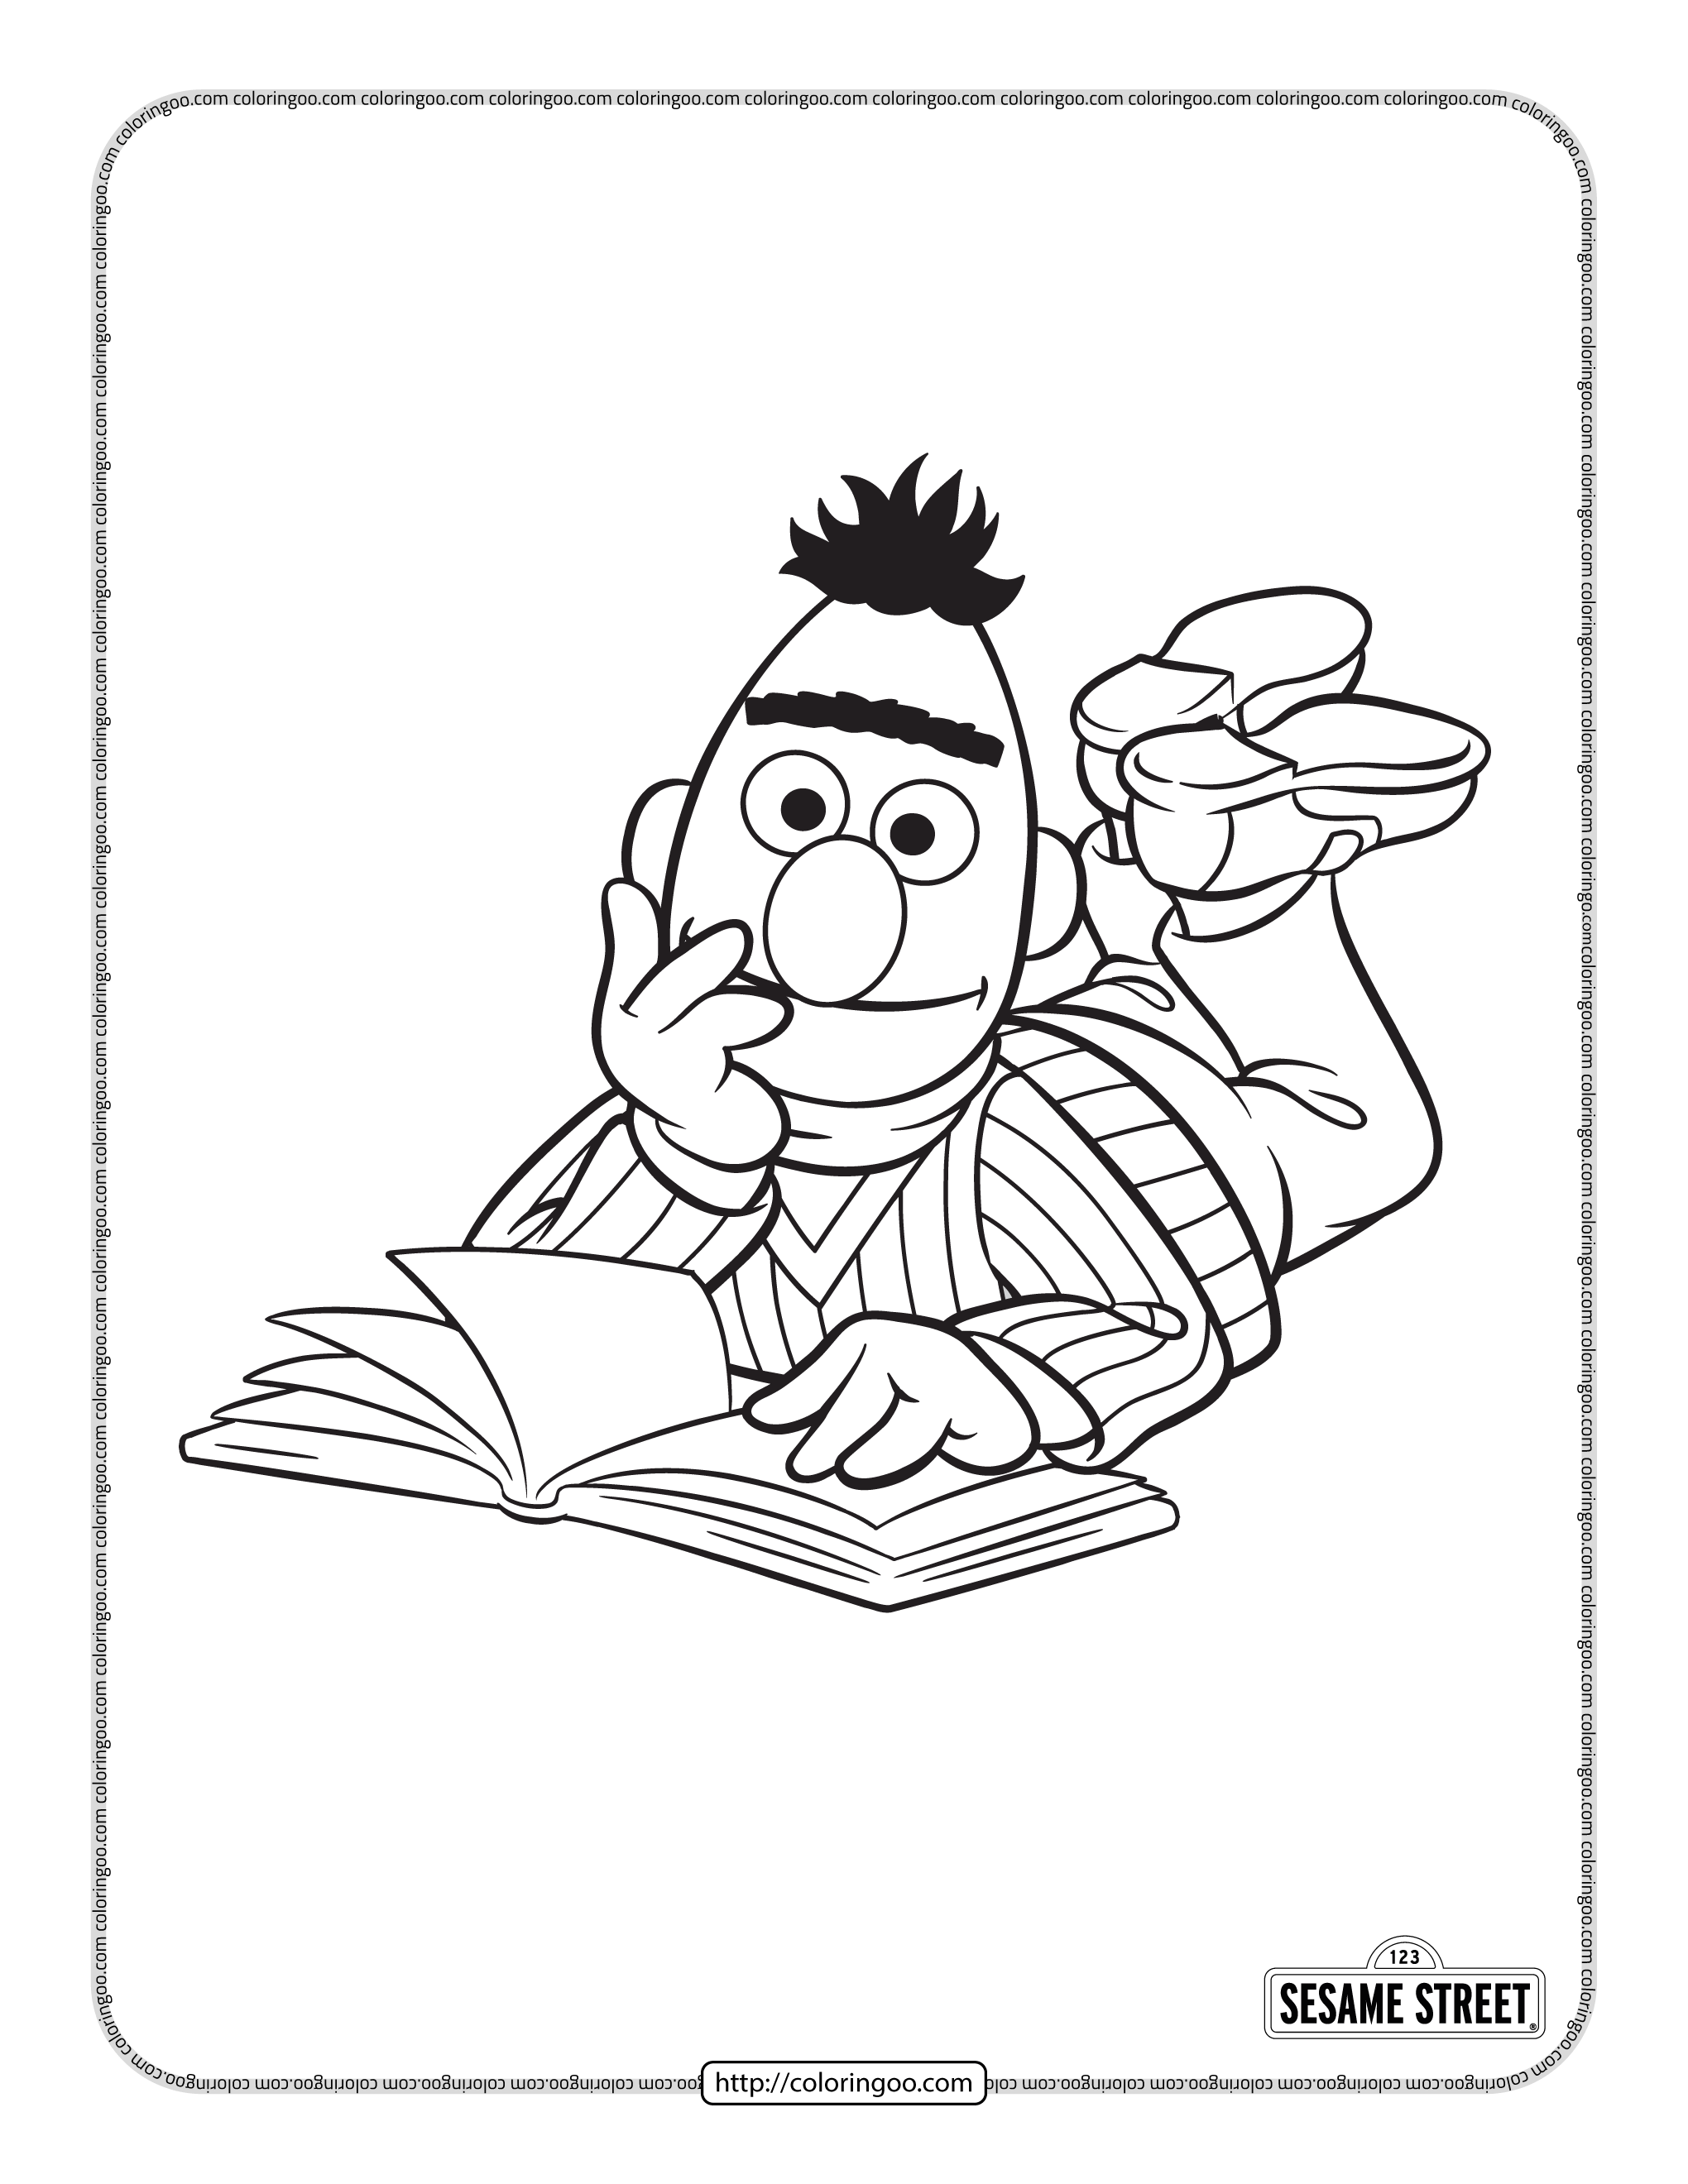 bert reading a book pdf coloring page